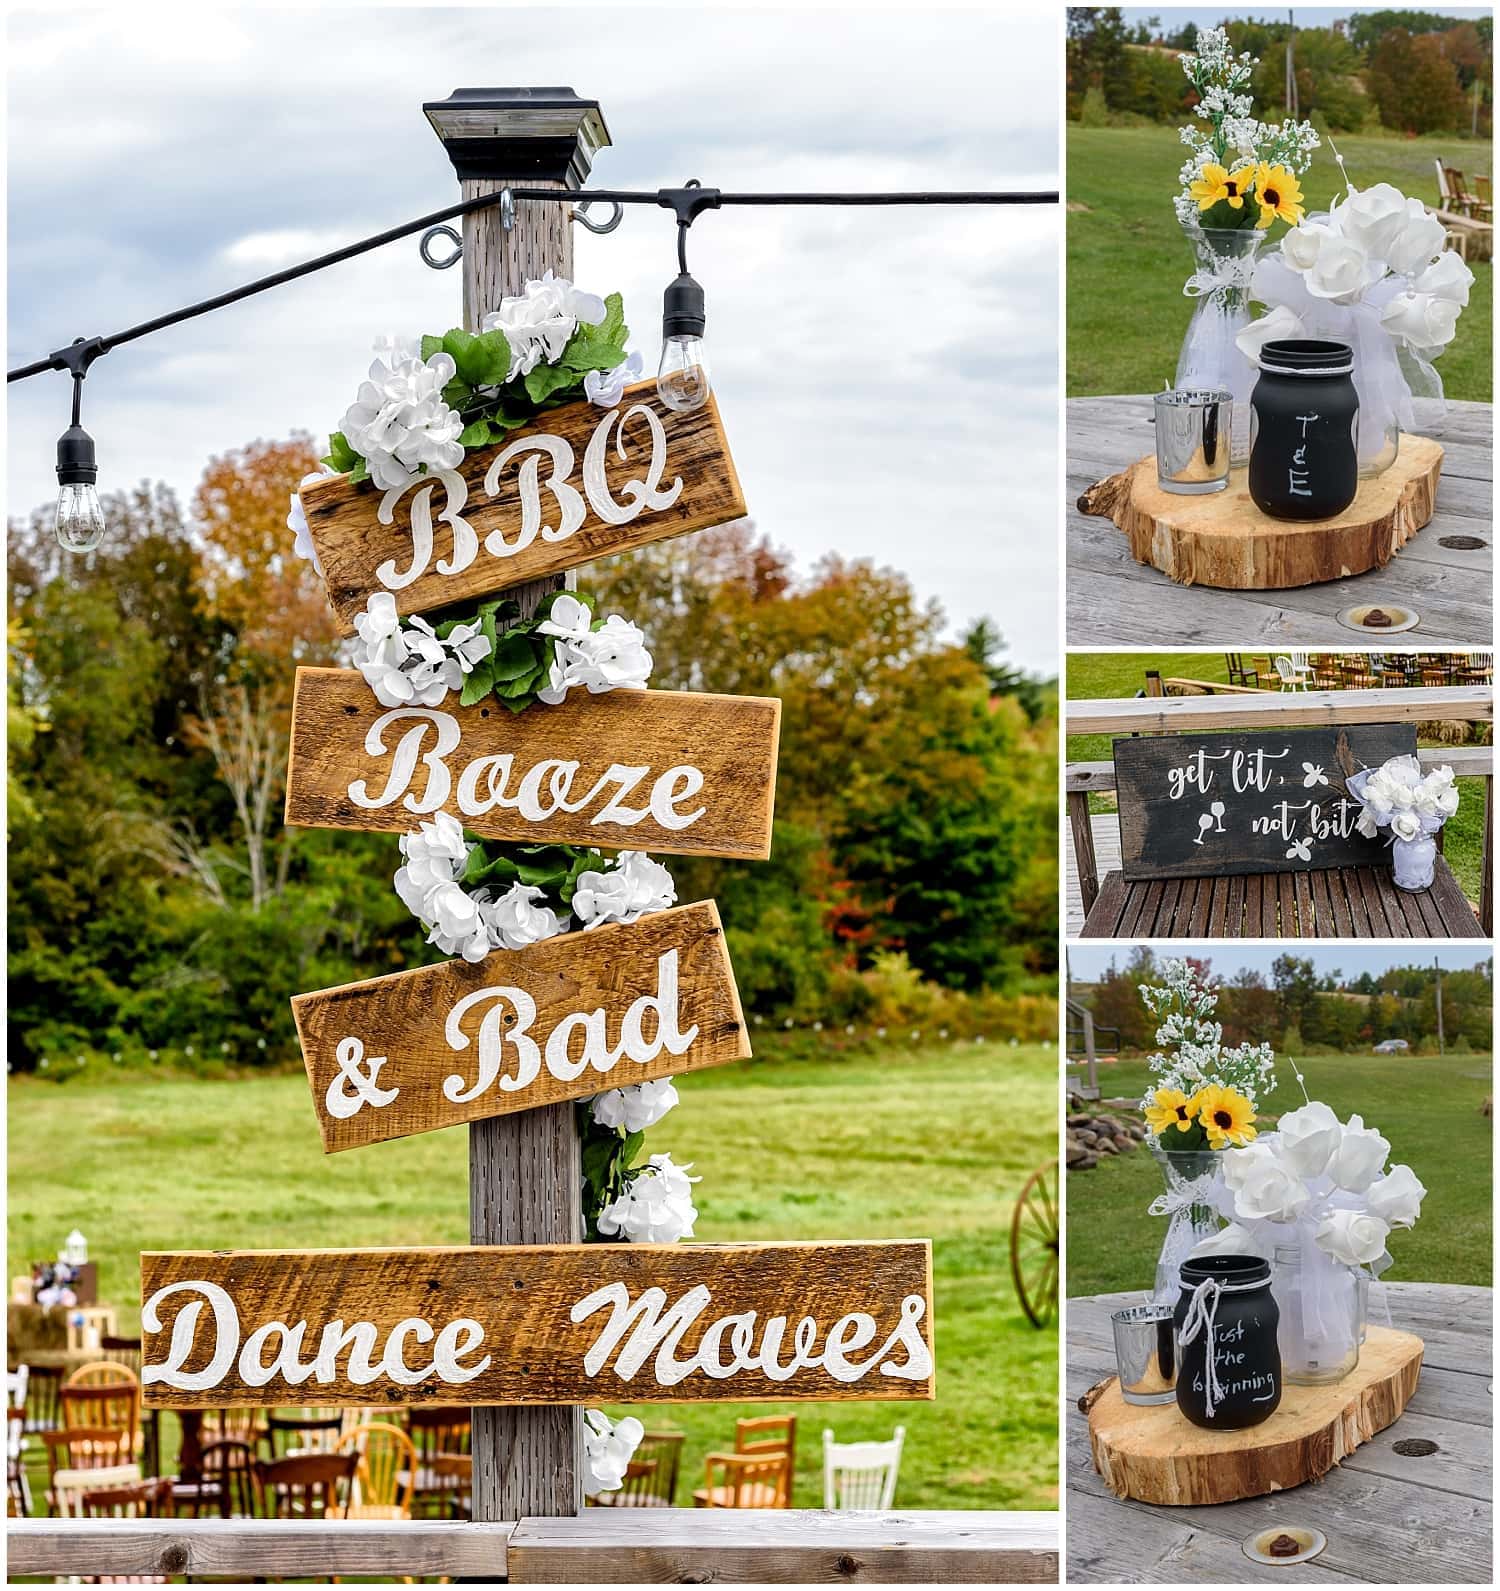 The wedding reception set up for a wedding day at the Barn at Sadie Belle Farm in Hantsport NS with wooden wedding signs.